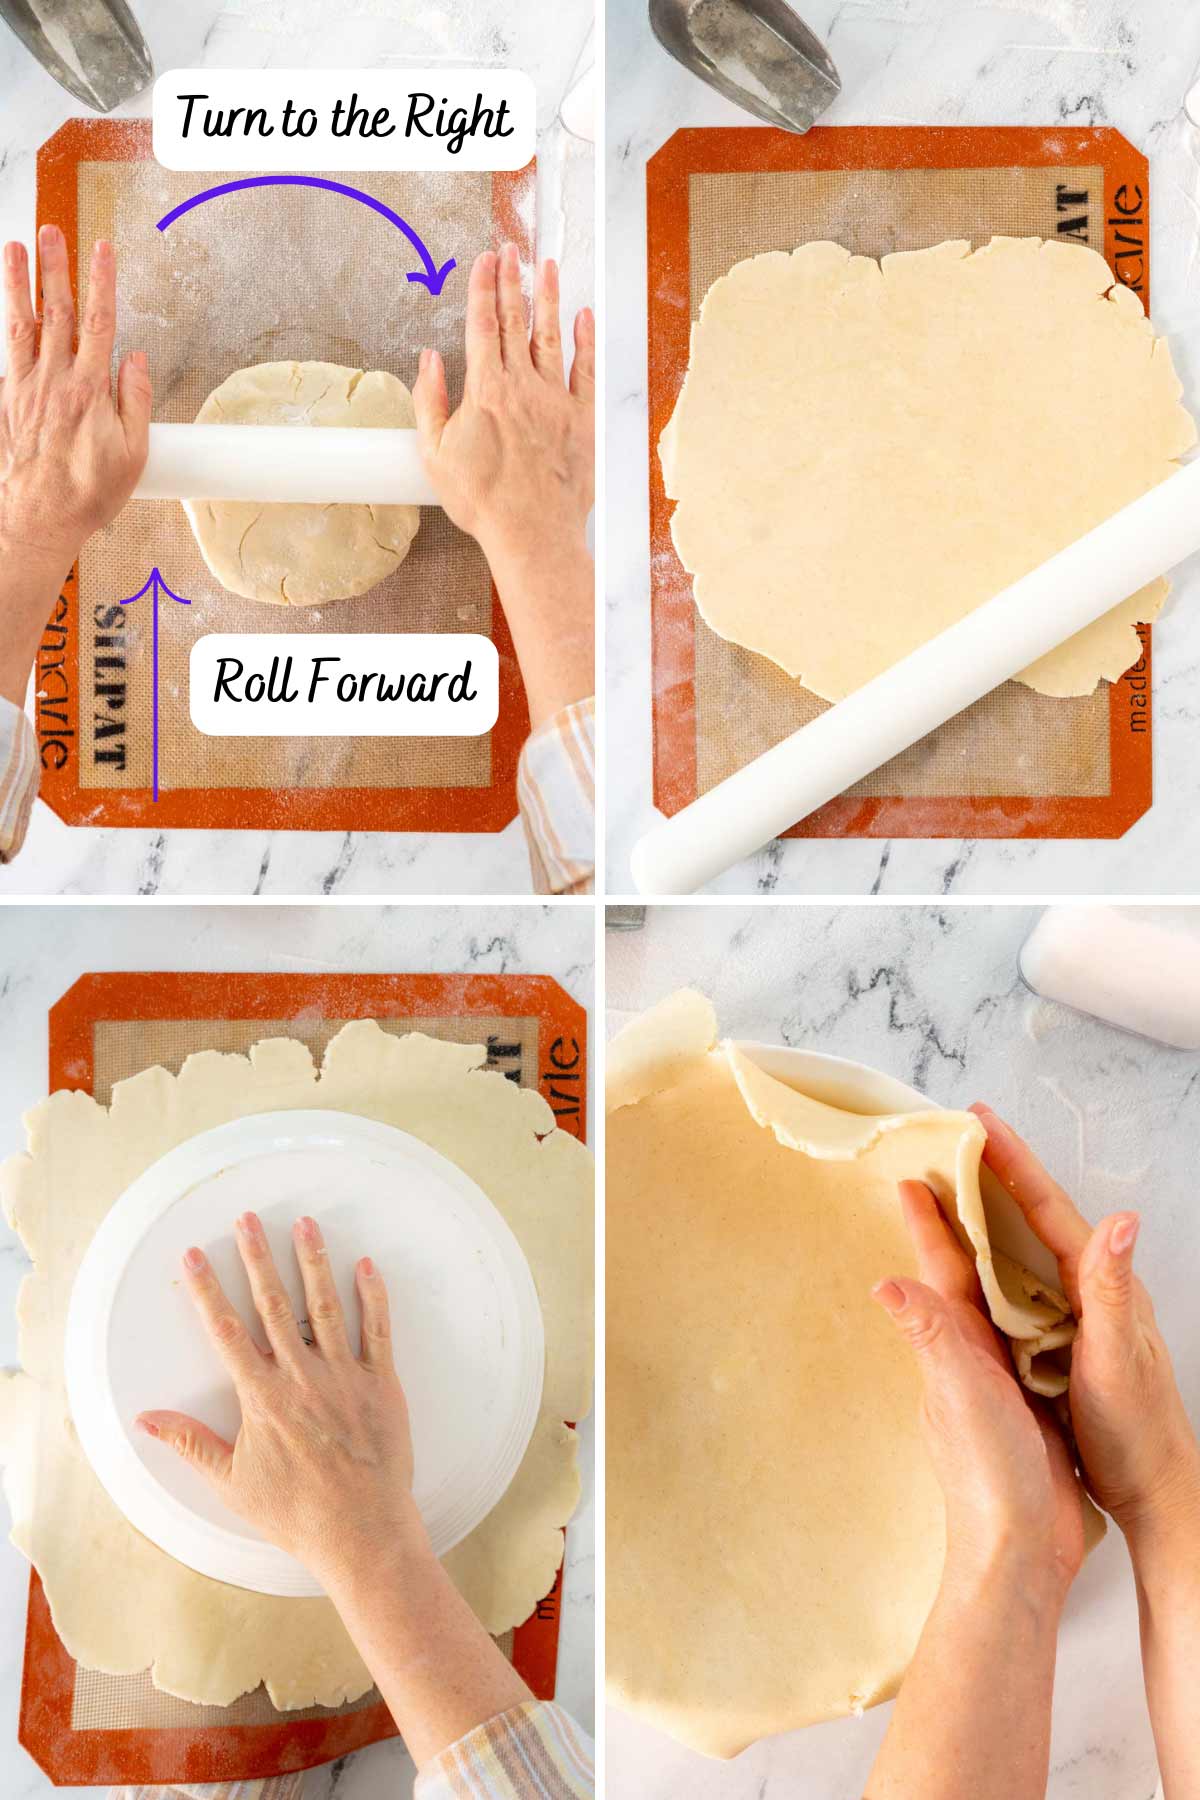 Person rolling the pie dough forward and rotating.